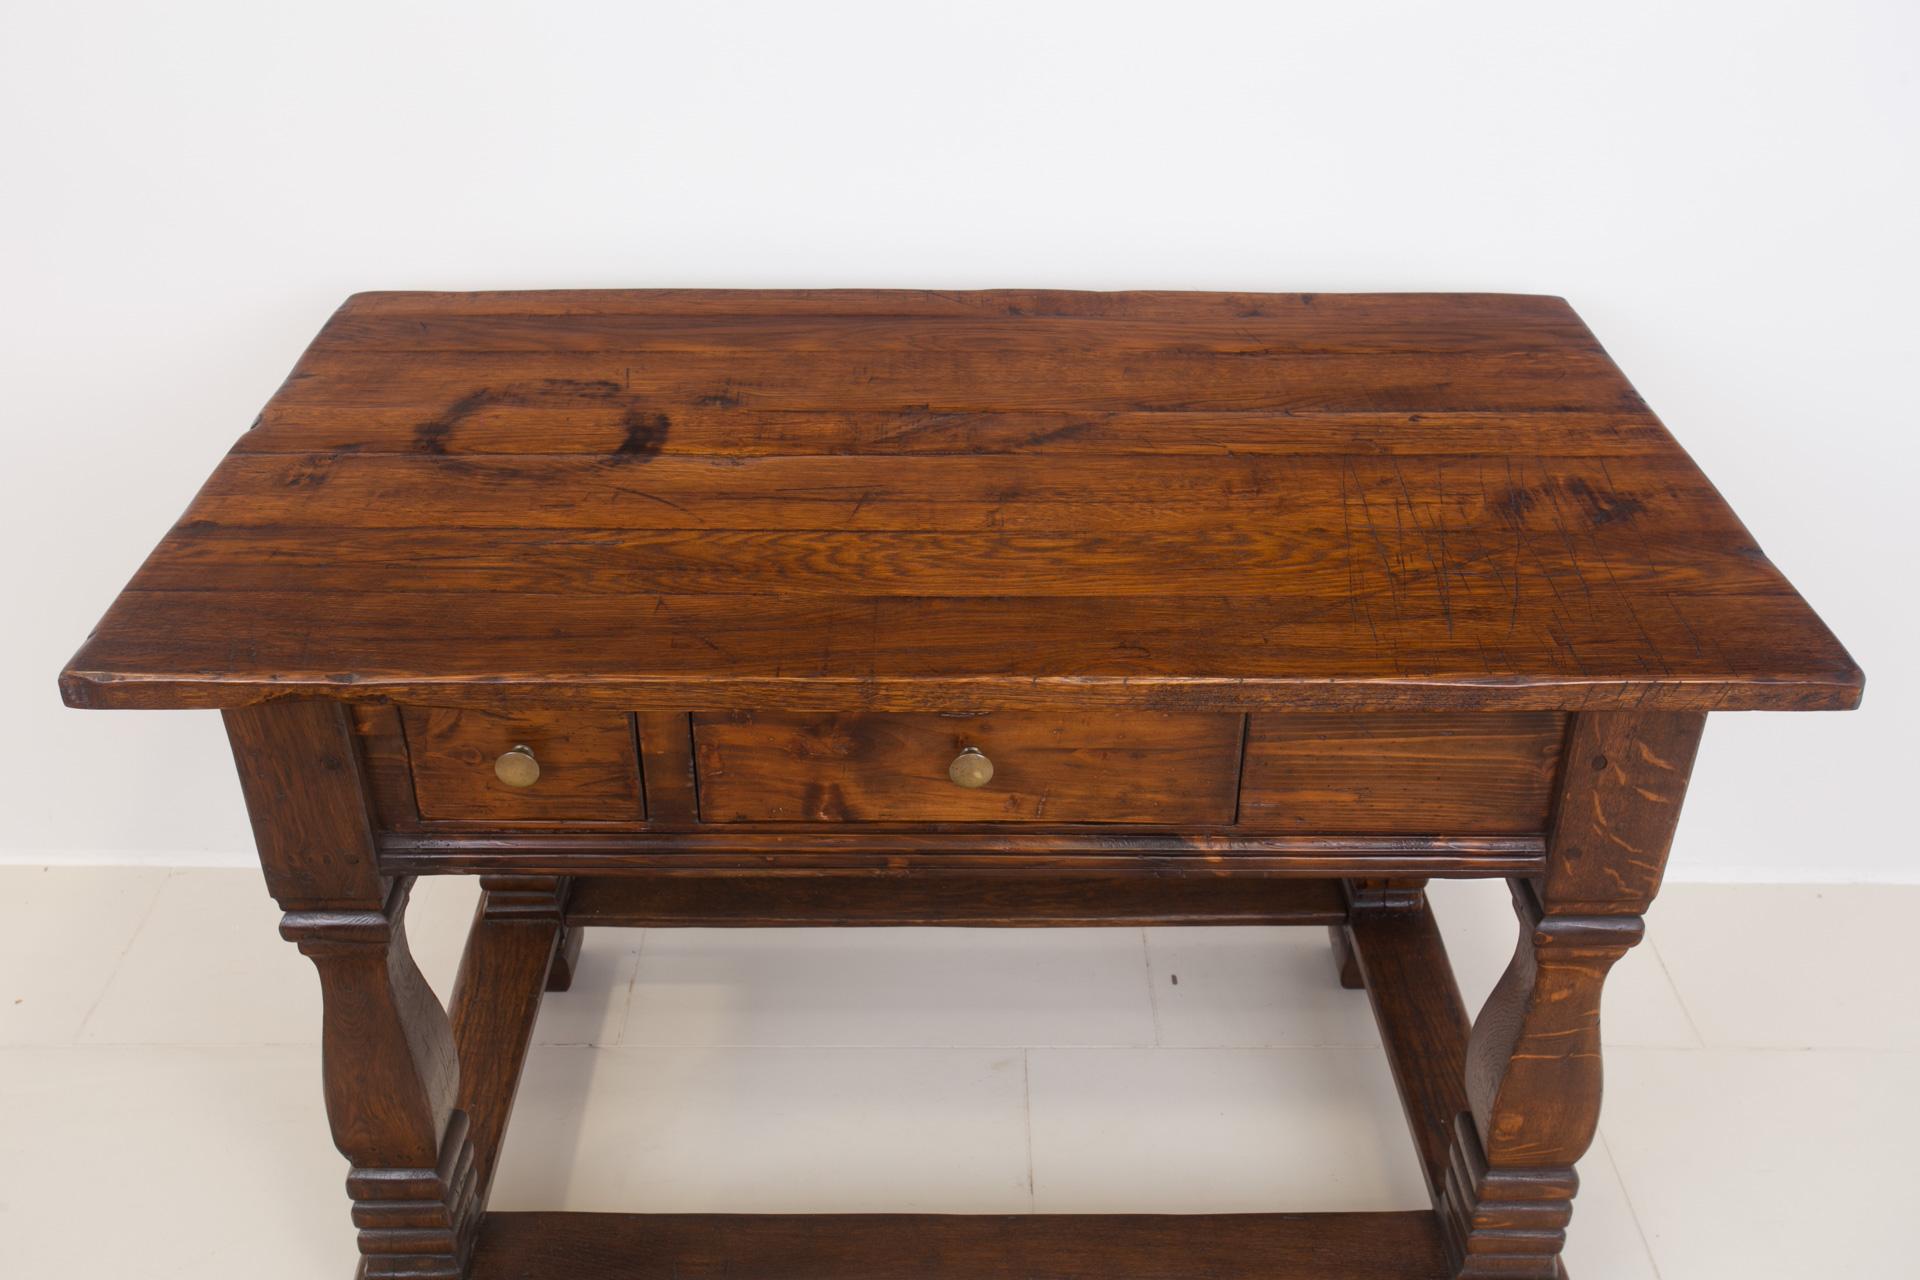 Solid Oak Table, 18th / 19th Century, Rustic Style, Prep or Dining Table 5